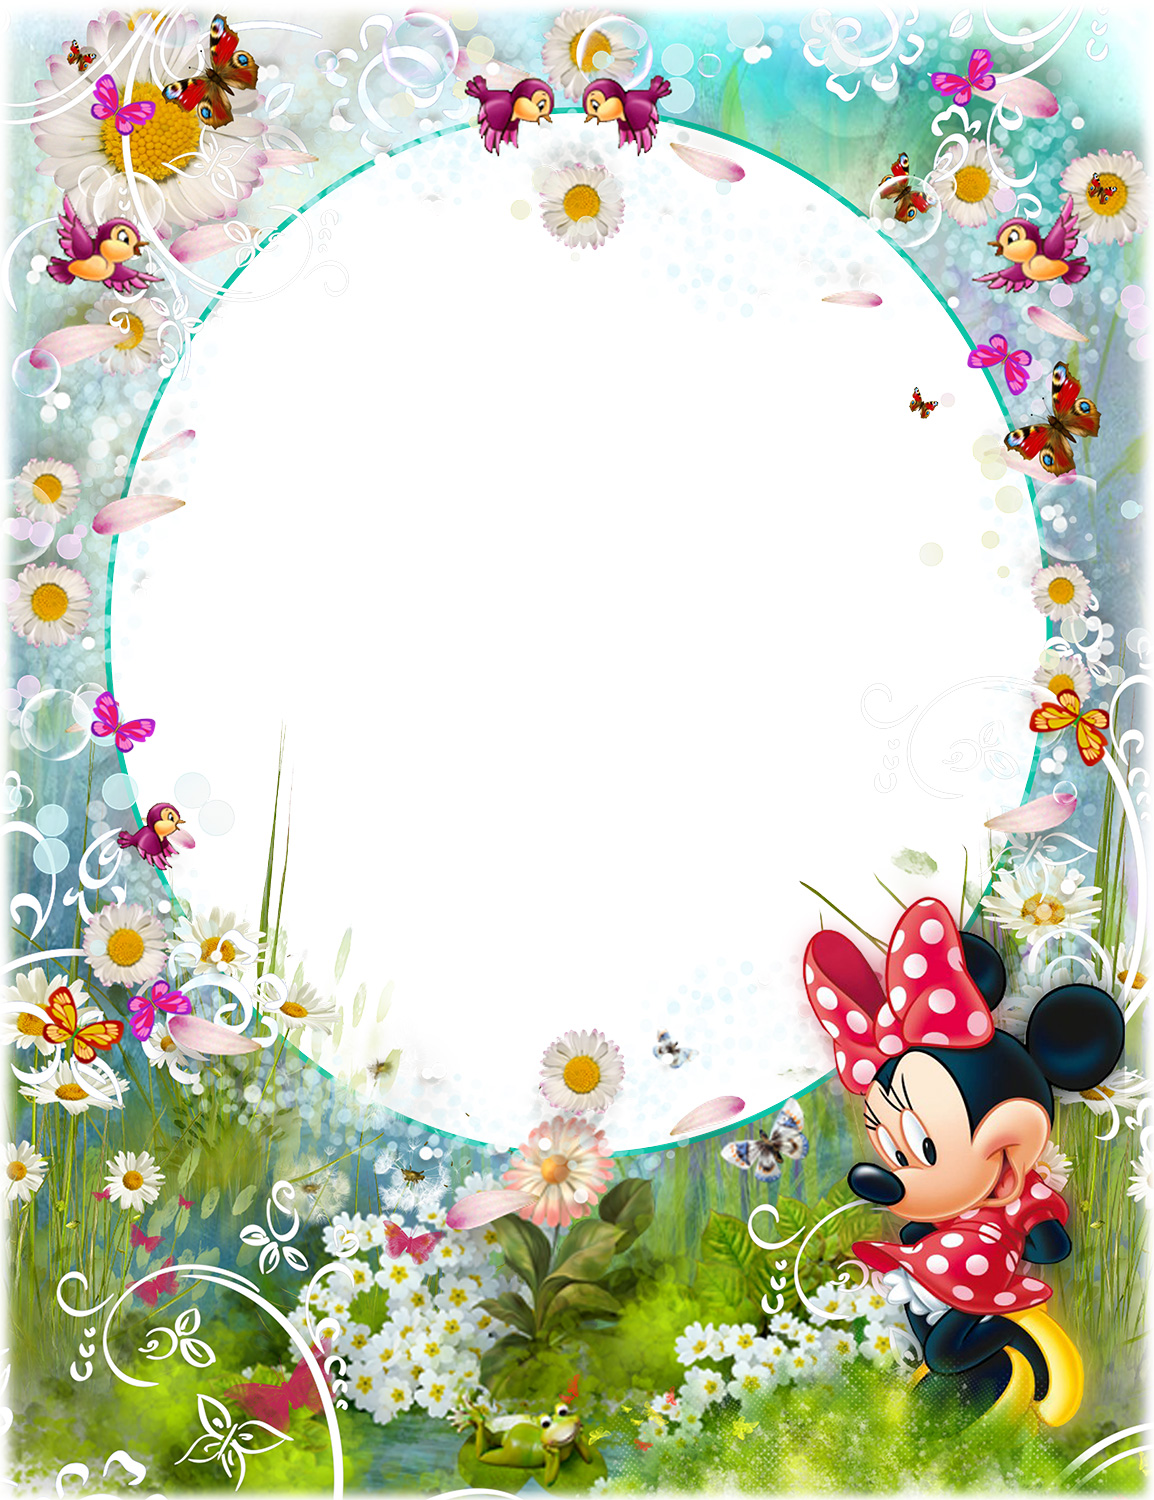 Awesome Cartoon Photo Frames For Kids - LoonaPix